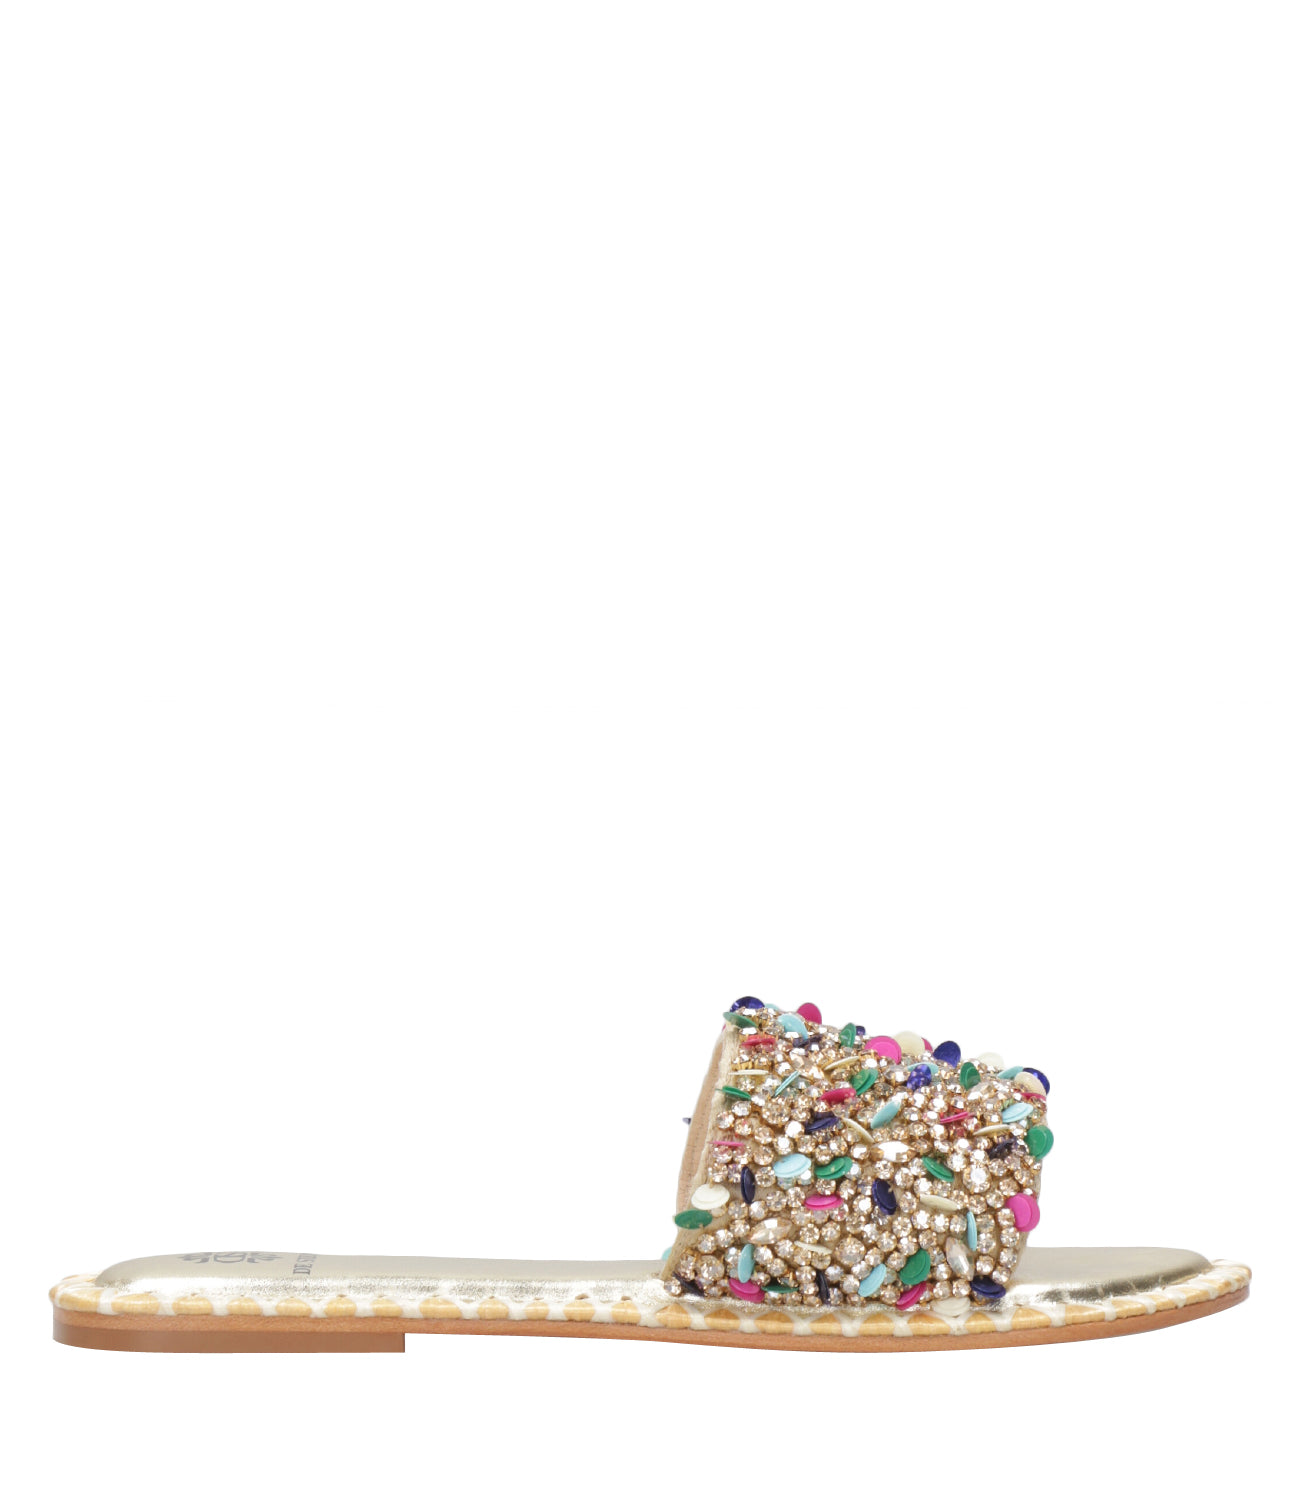 De Siena Shoes | Chanelle Natural and Gold Slipper